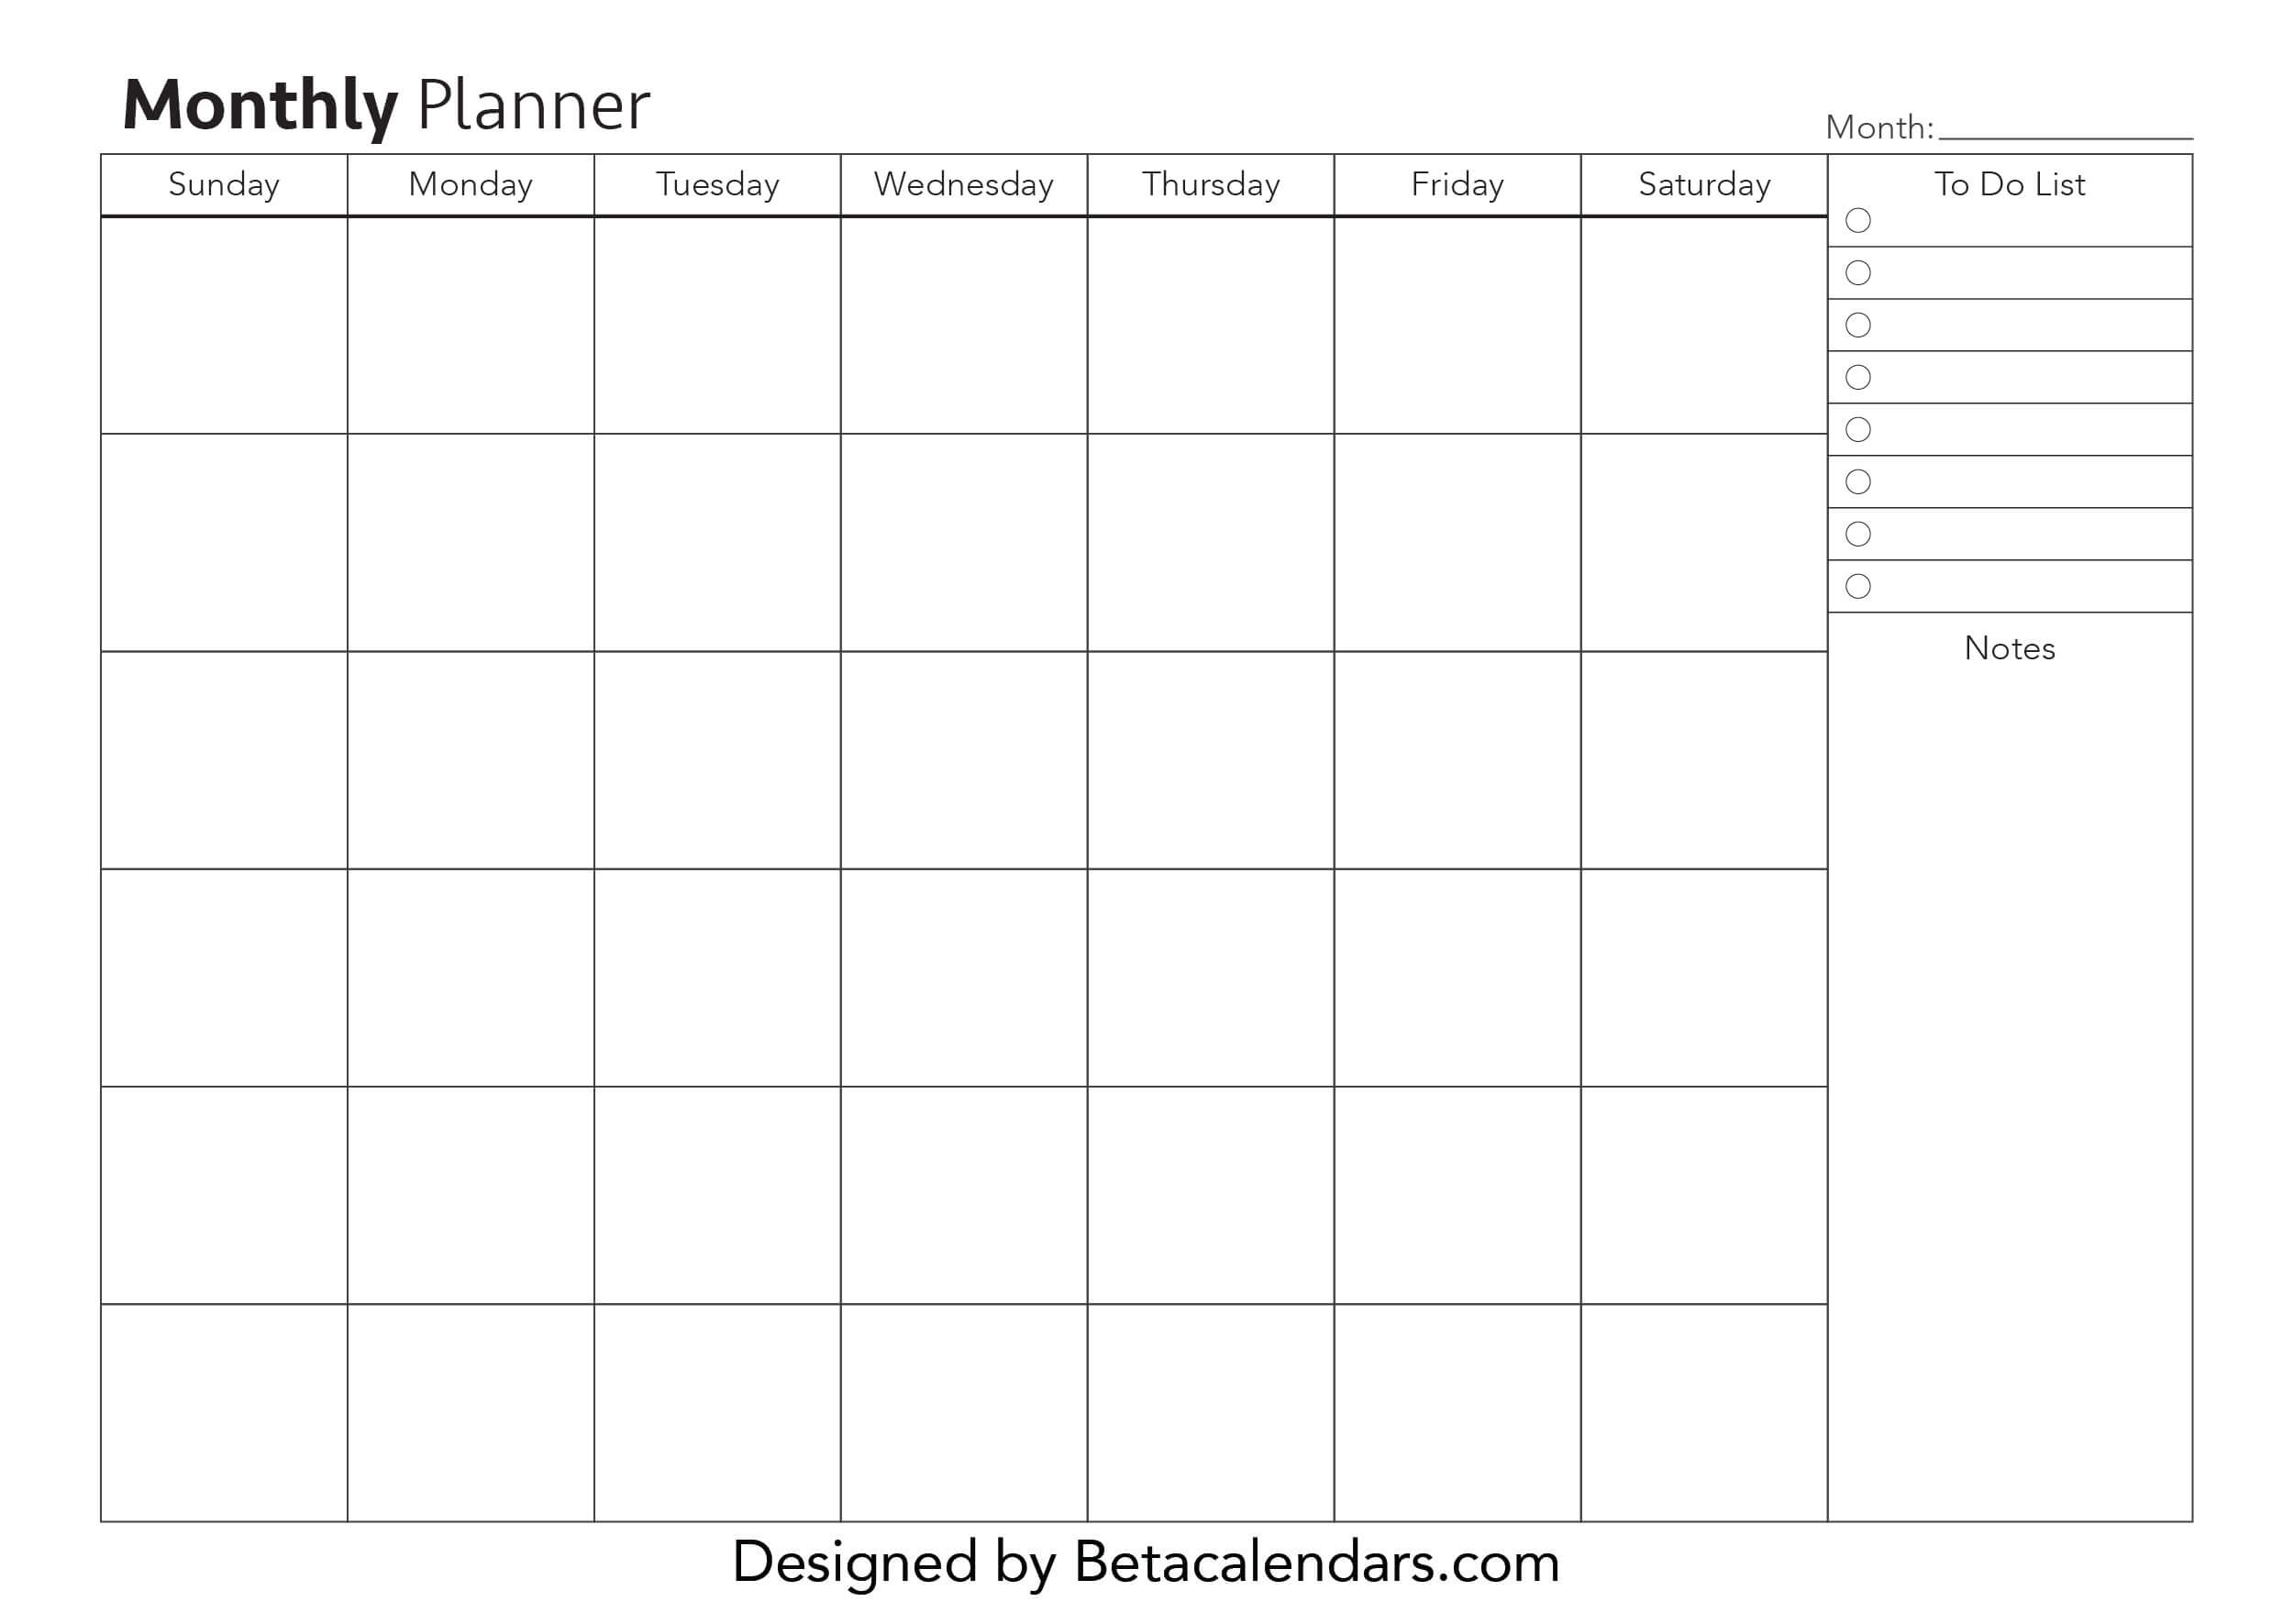 Monthly Planner | Free Blank Printable Monthly Planners